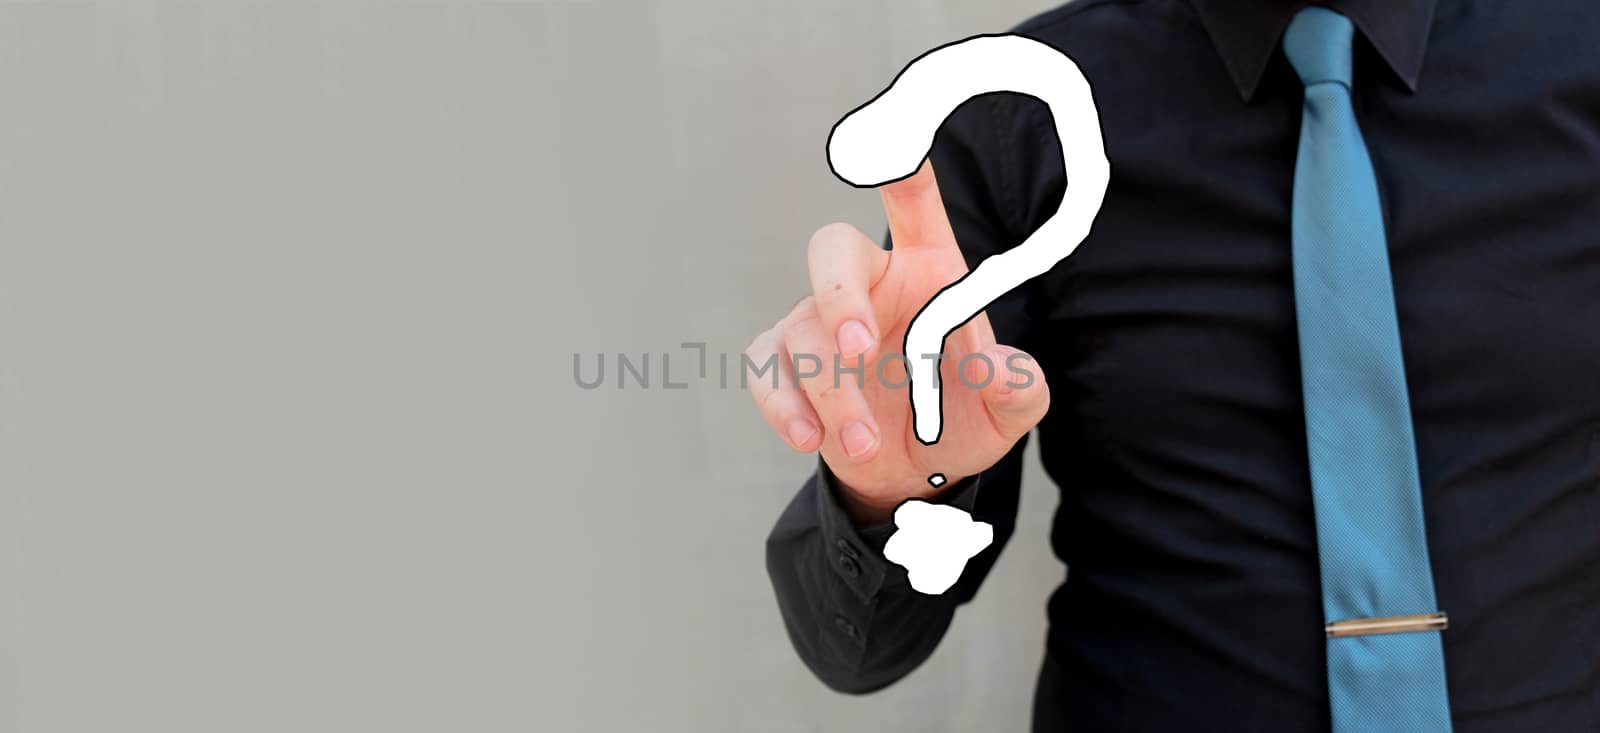 Man touching question mark with tip of his finger. Innovation and inspiration by negmardesign